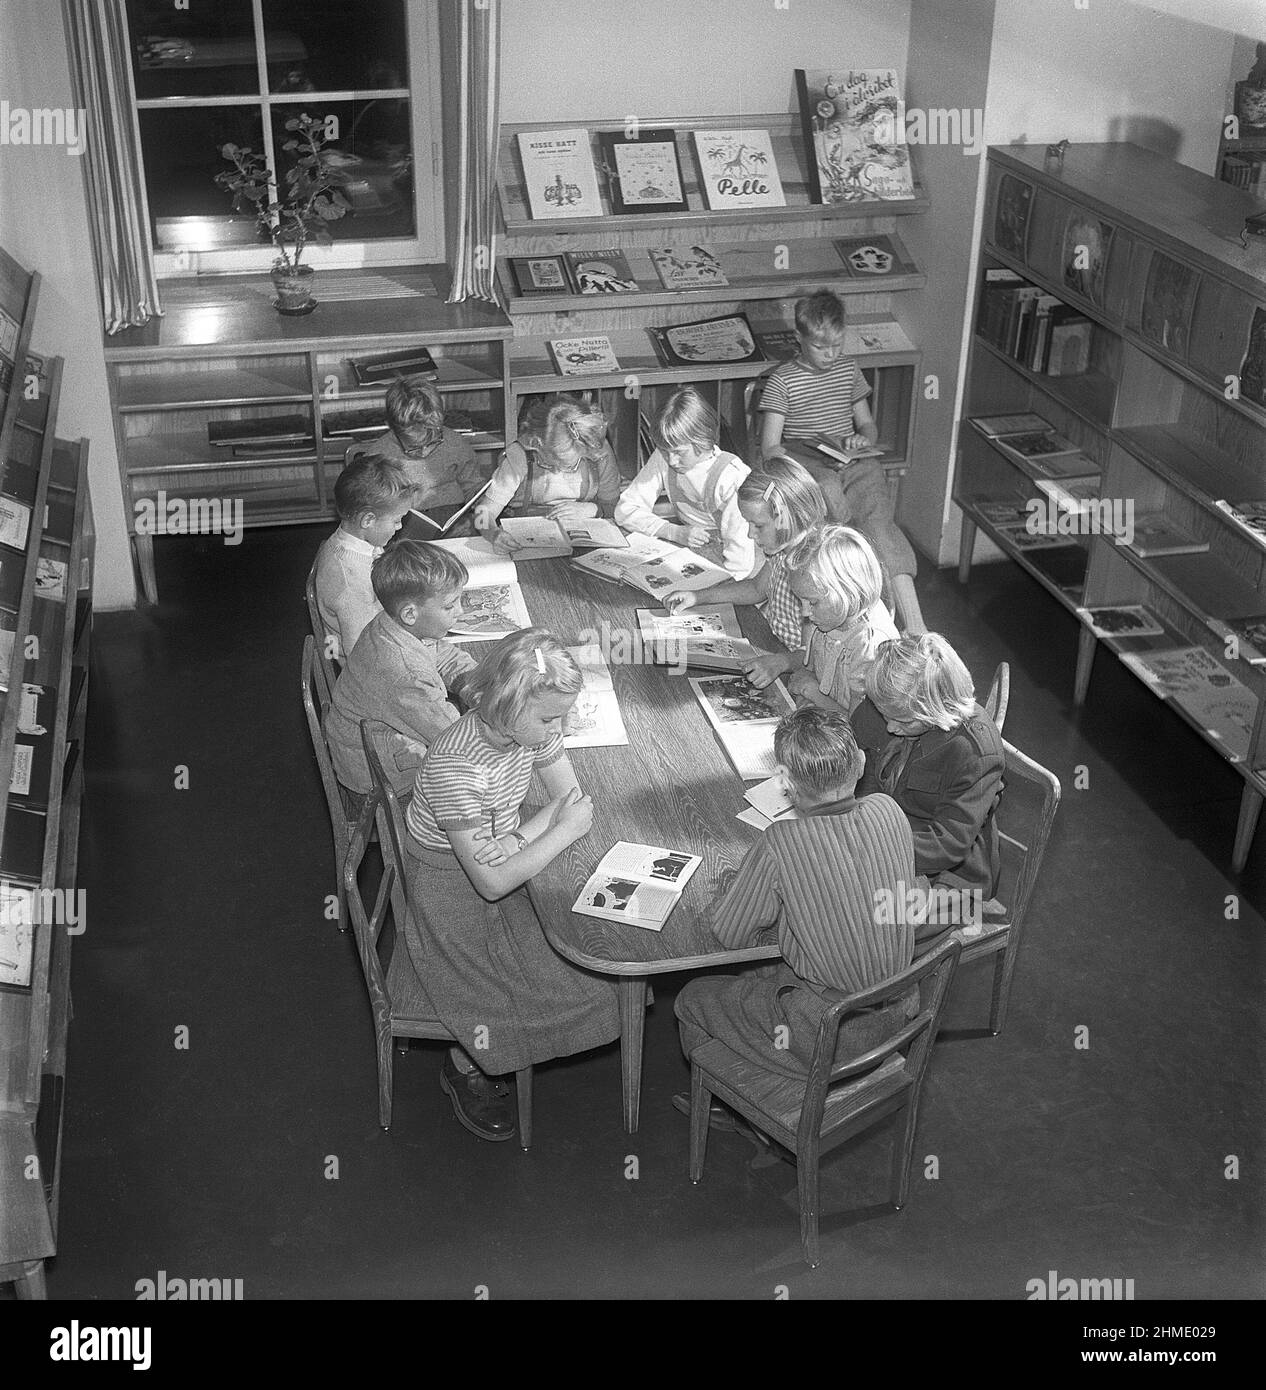 Children of the 1950s. Interior of a public library and a room with bookshelves on the walls. A group of children are sitting at a table, all reading a book each. Sweden 1951 Kristoffersson ref BE25-12 Stock Photo